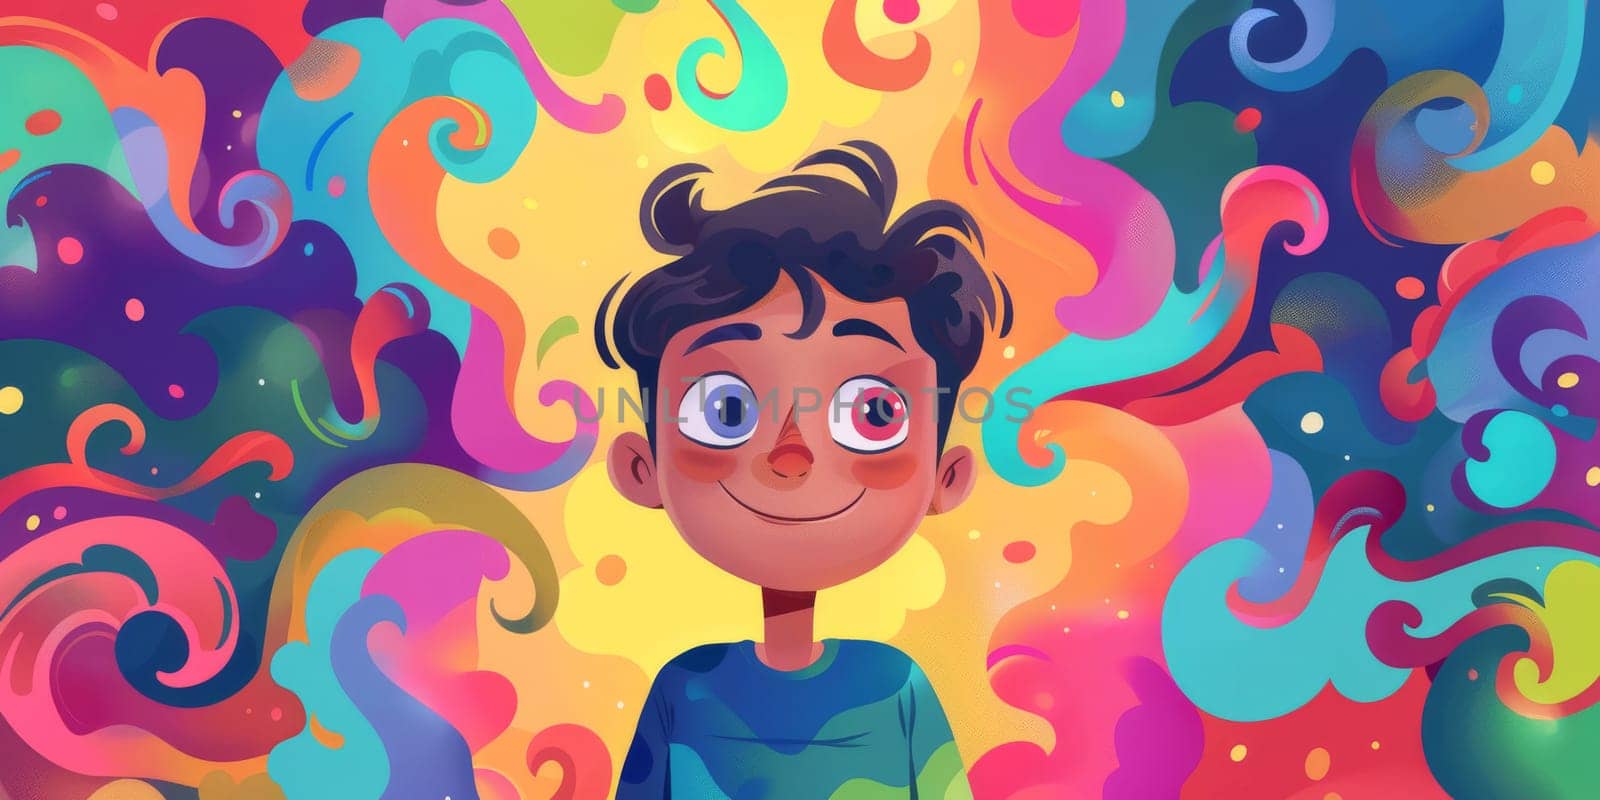 Cartoon kid with ADHD syndome on a colorful background